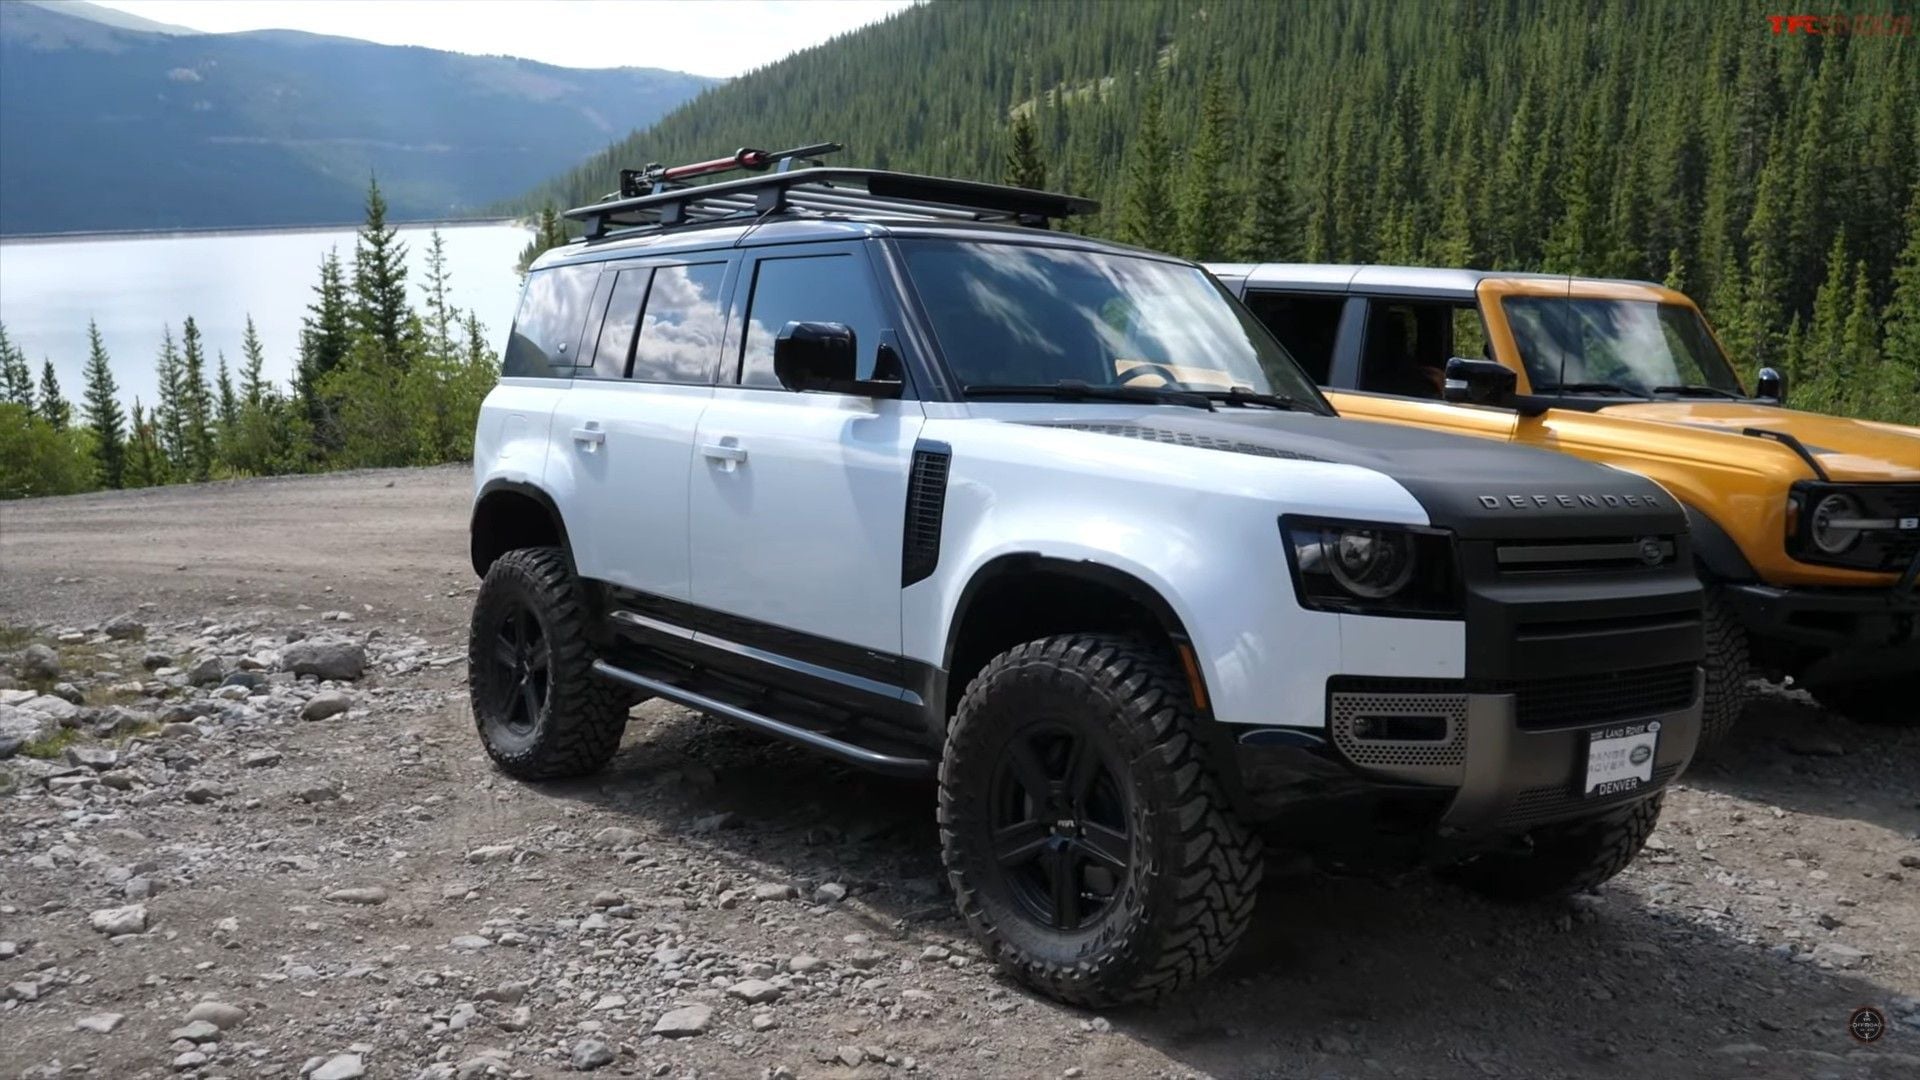 is this denver's big bertha? - Land Rover Forums - Land Rover ...